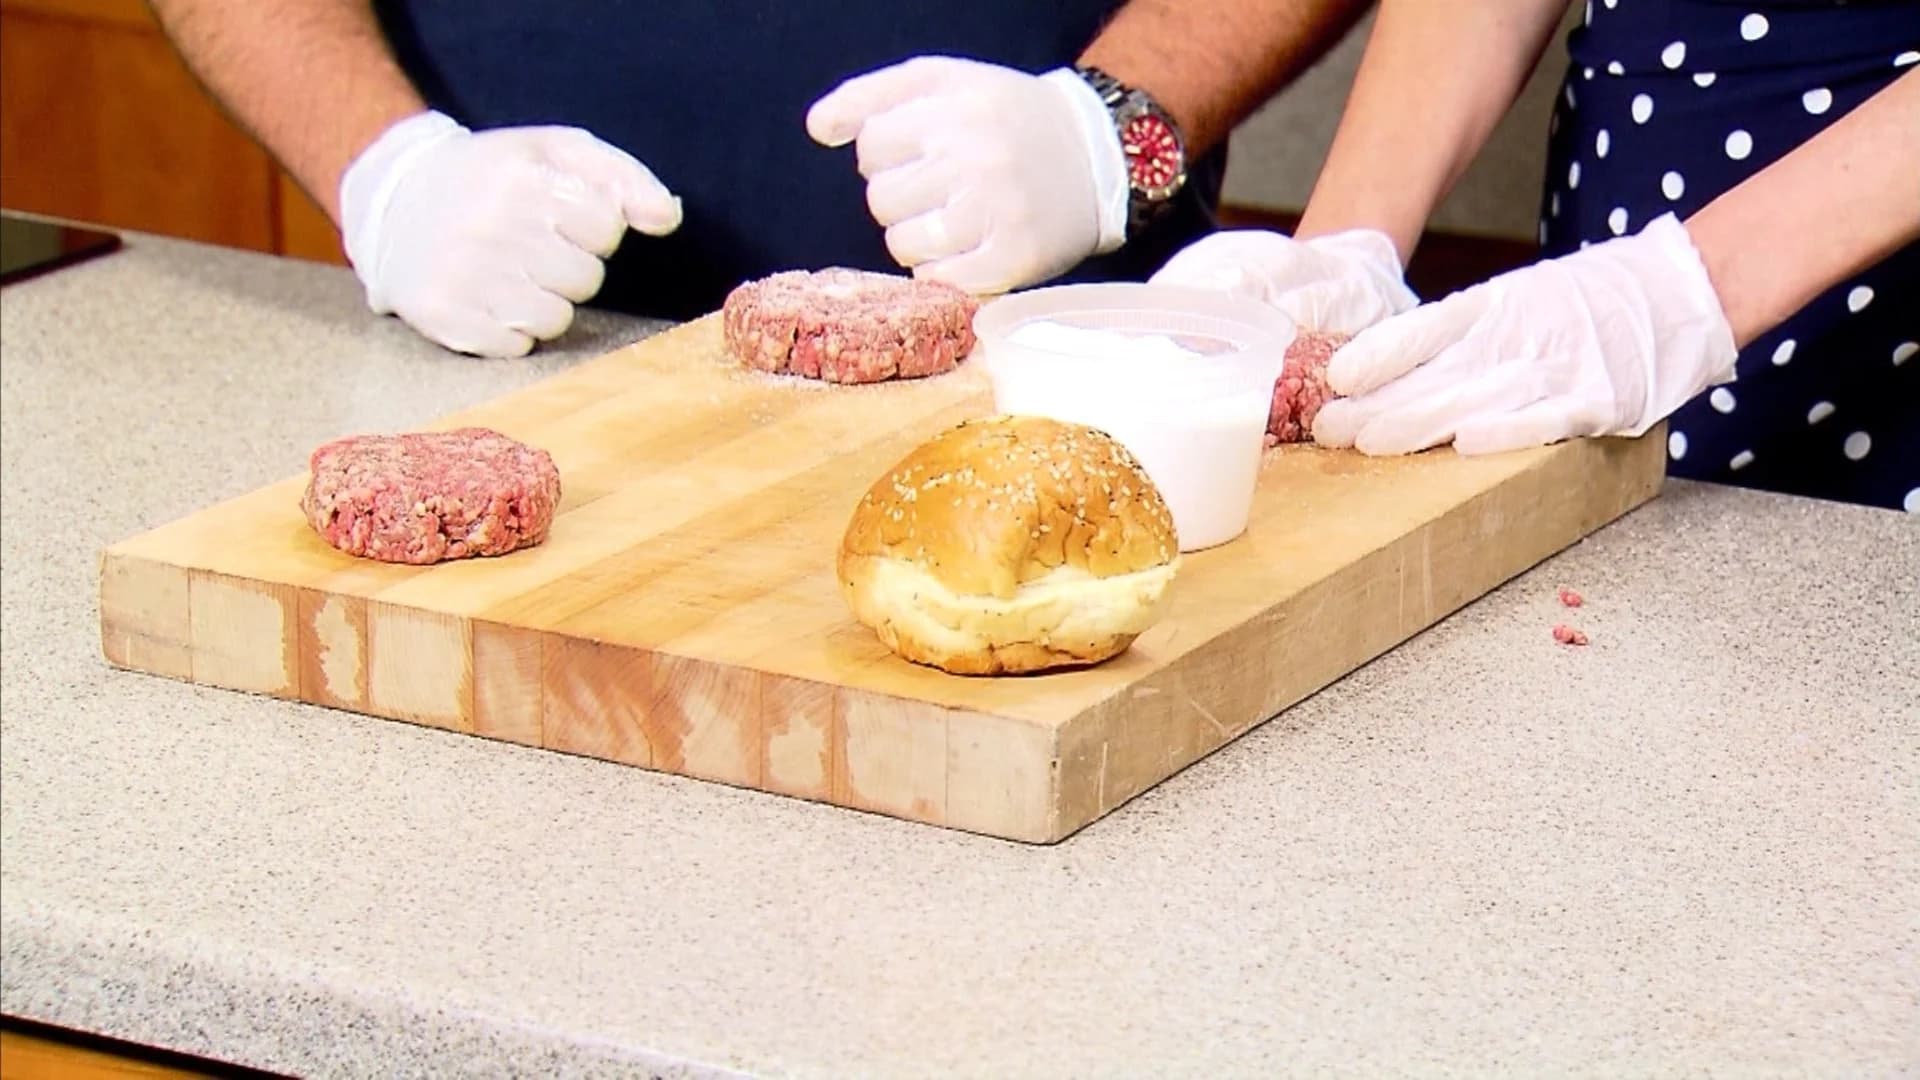 Chef's Quick Tip: Making a perfect burger